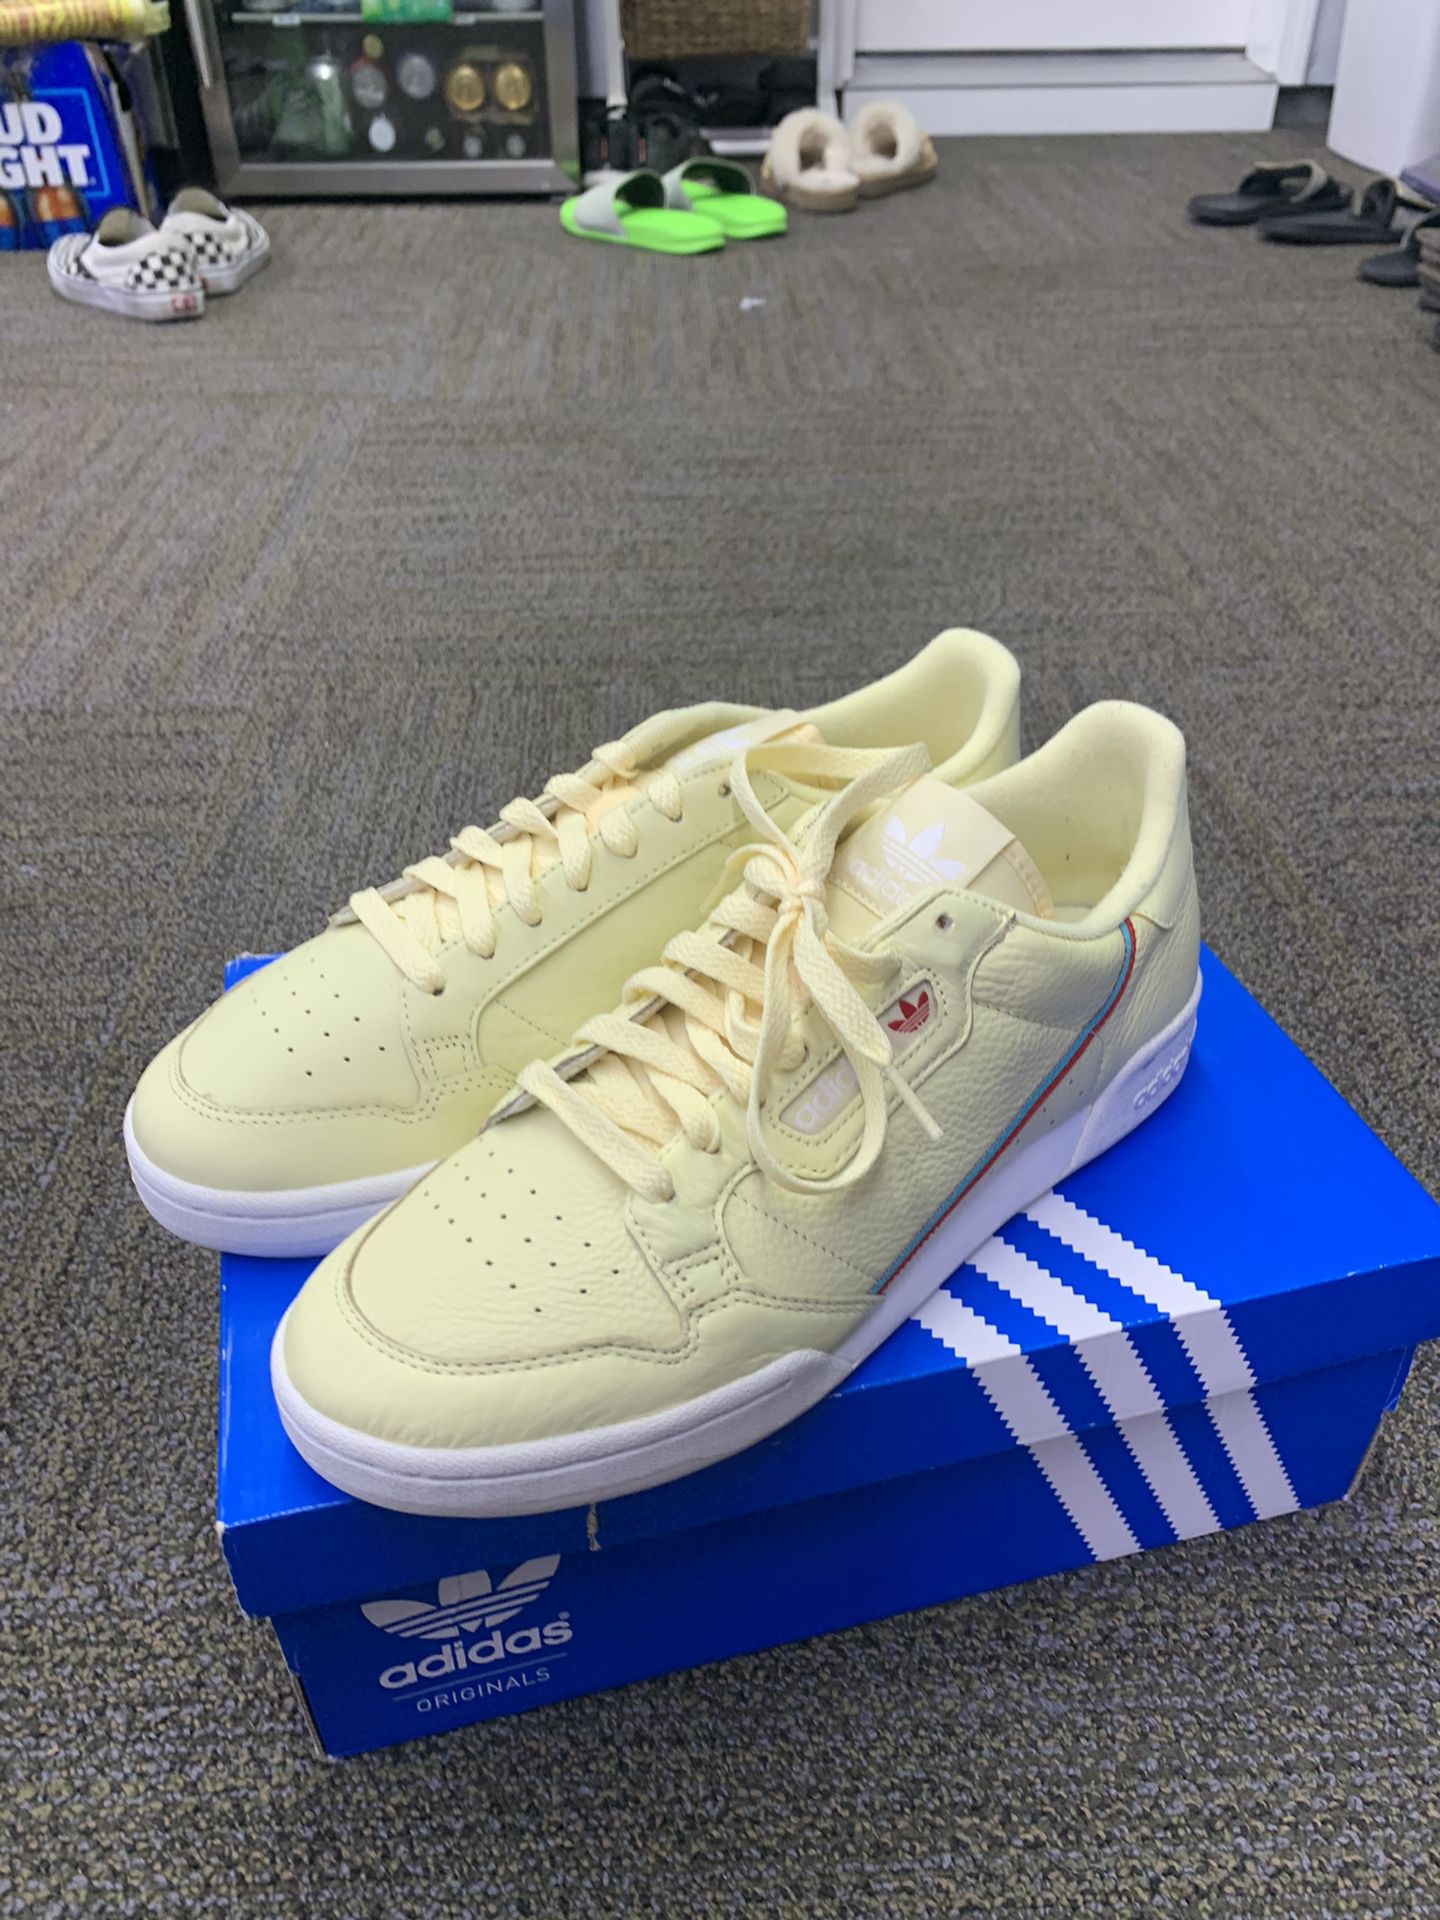 Adidas Continental 80 Sun 10 for Sale in Claremont, CA - OfferUp